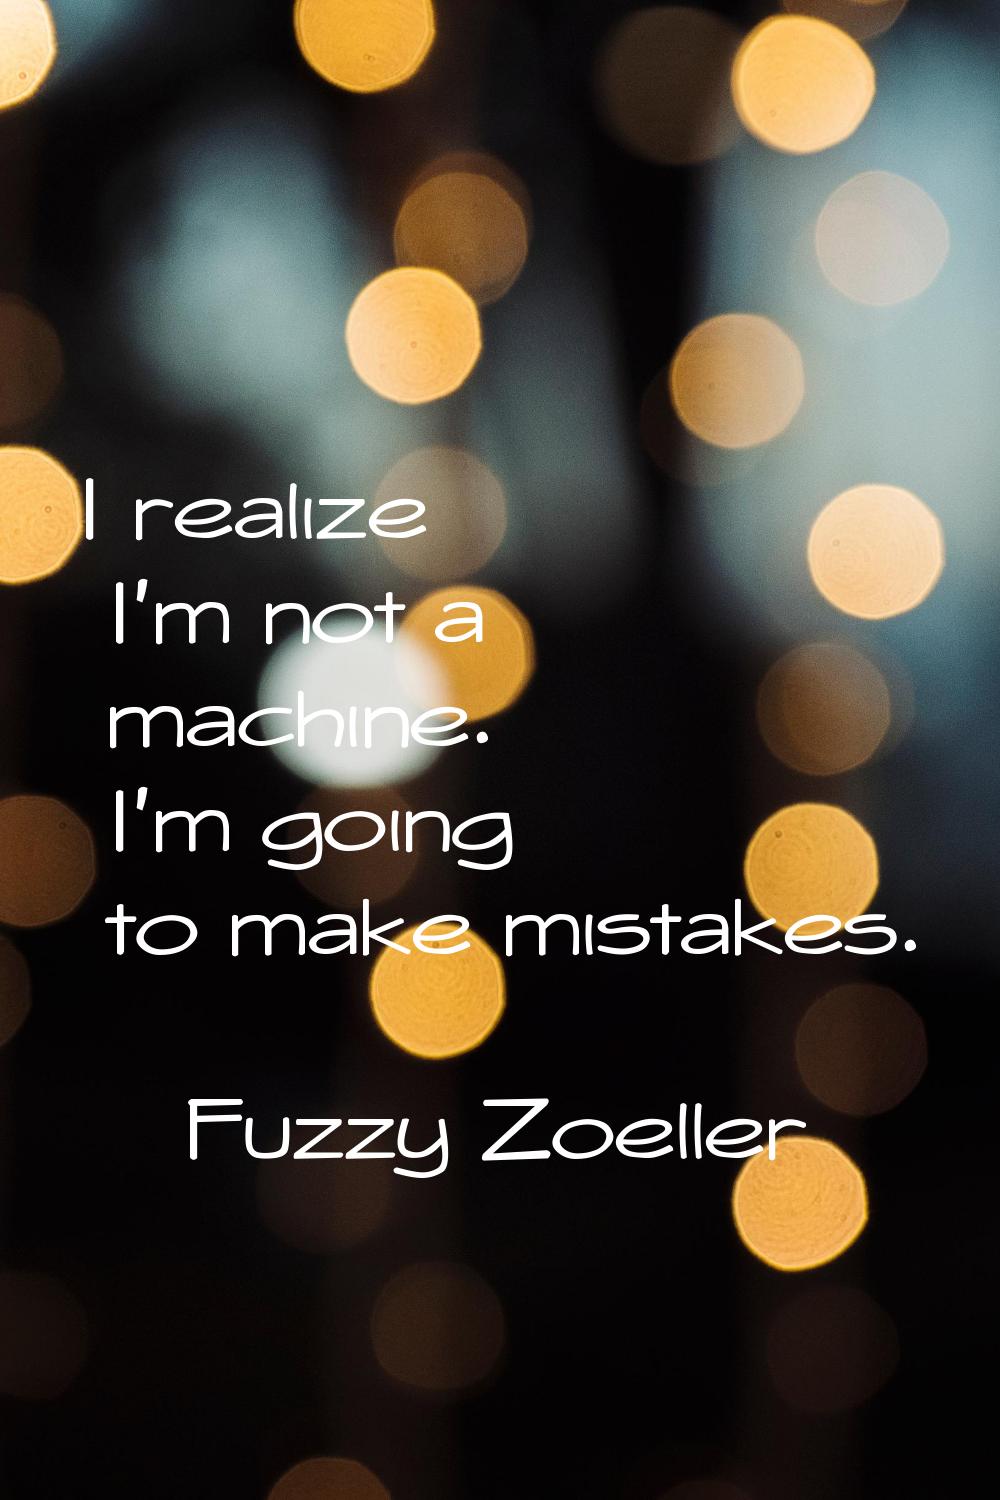 I realize I'm not a machine. I'm going to make mistakes.